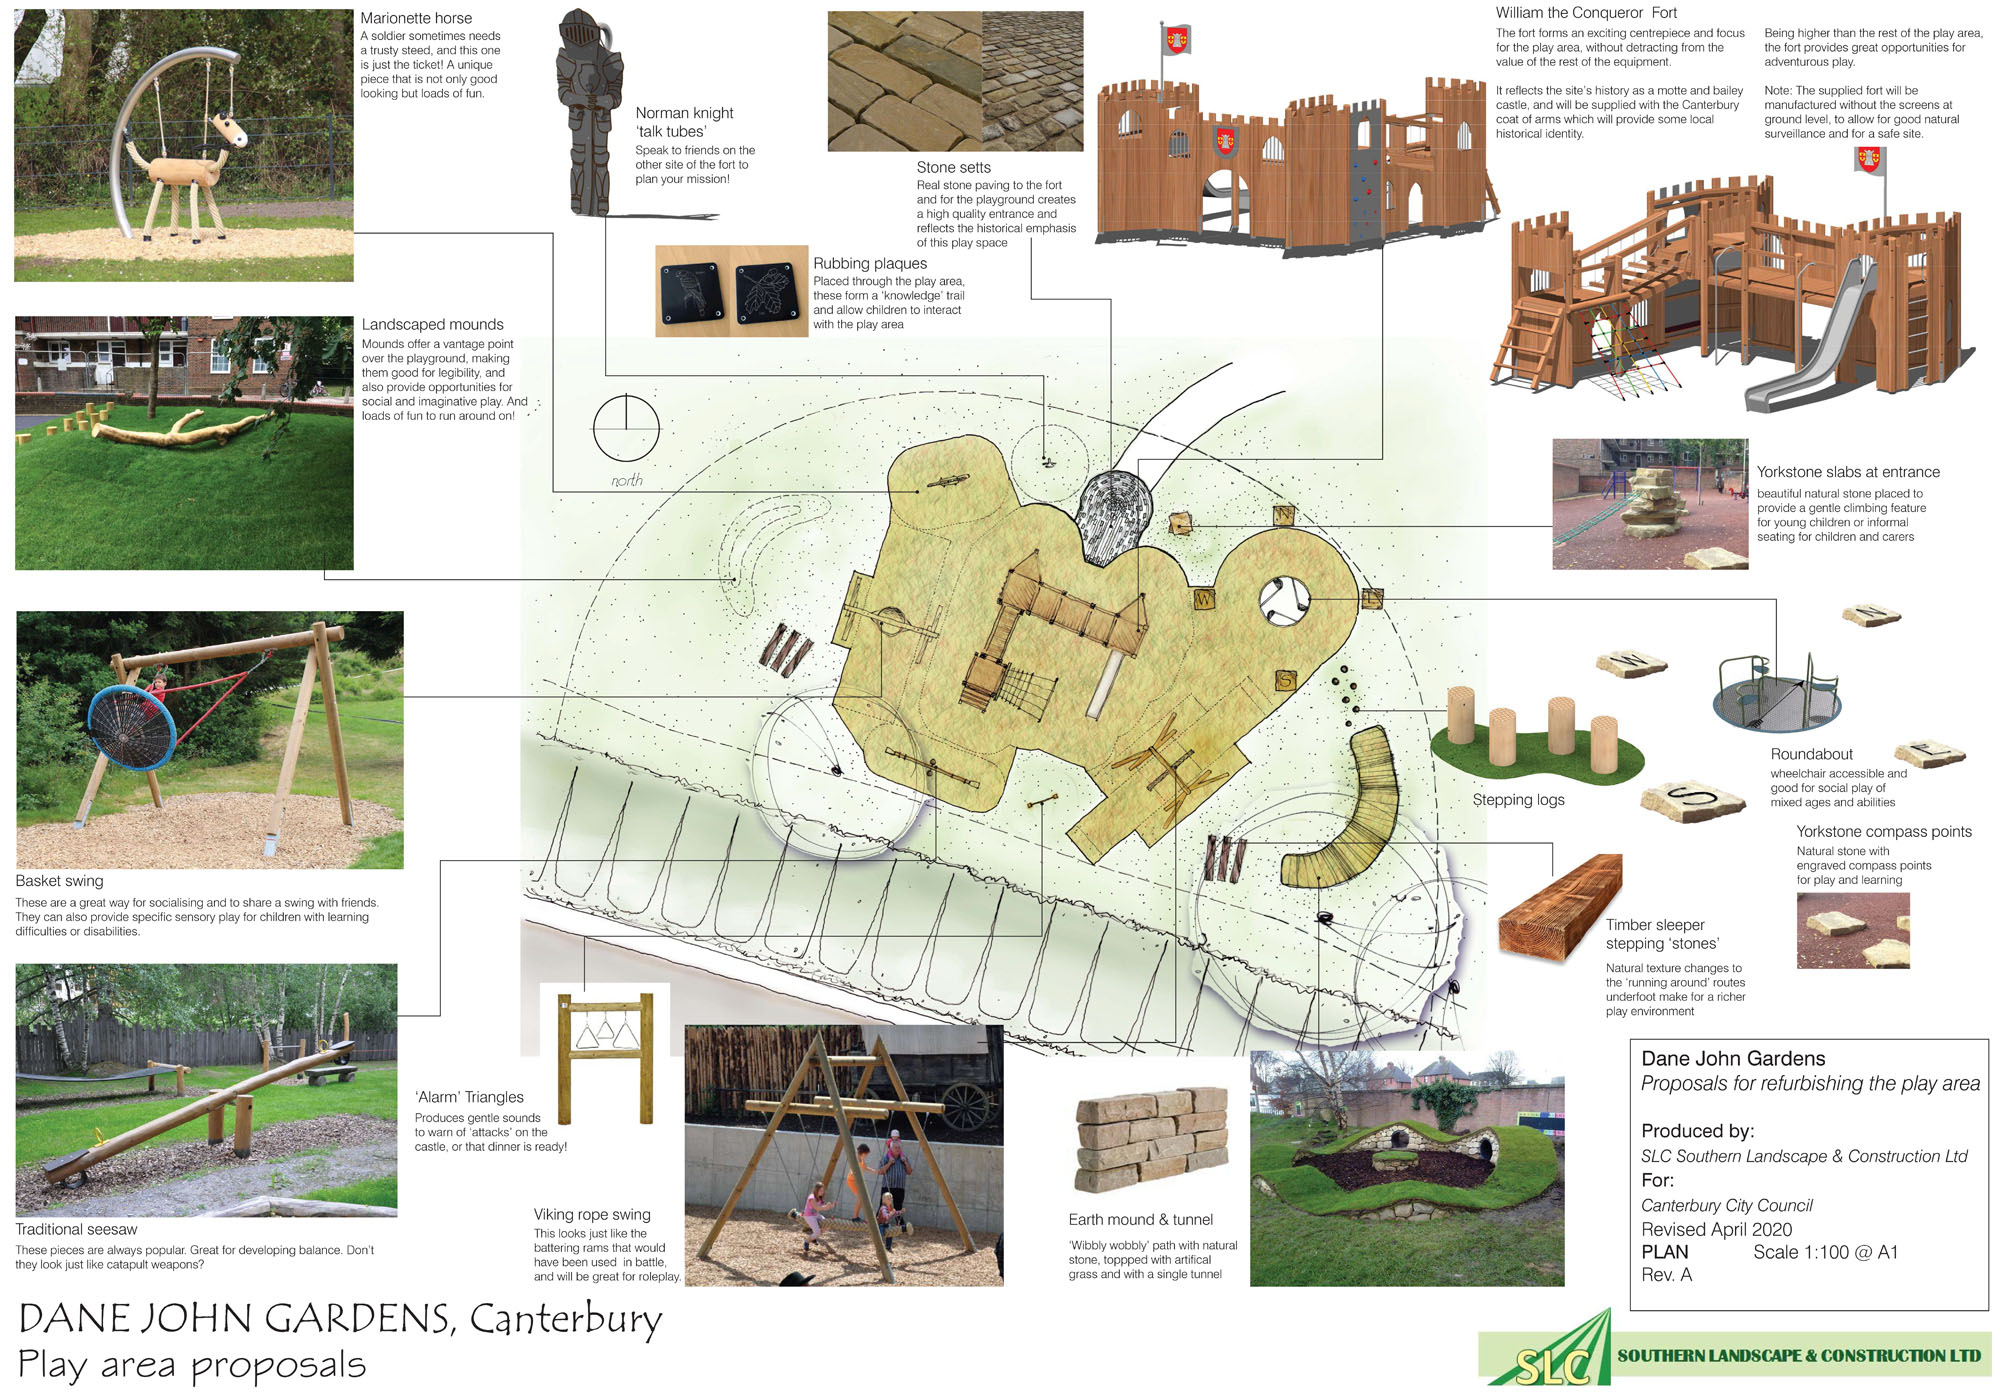 A second design for the Dane John play area